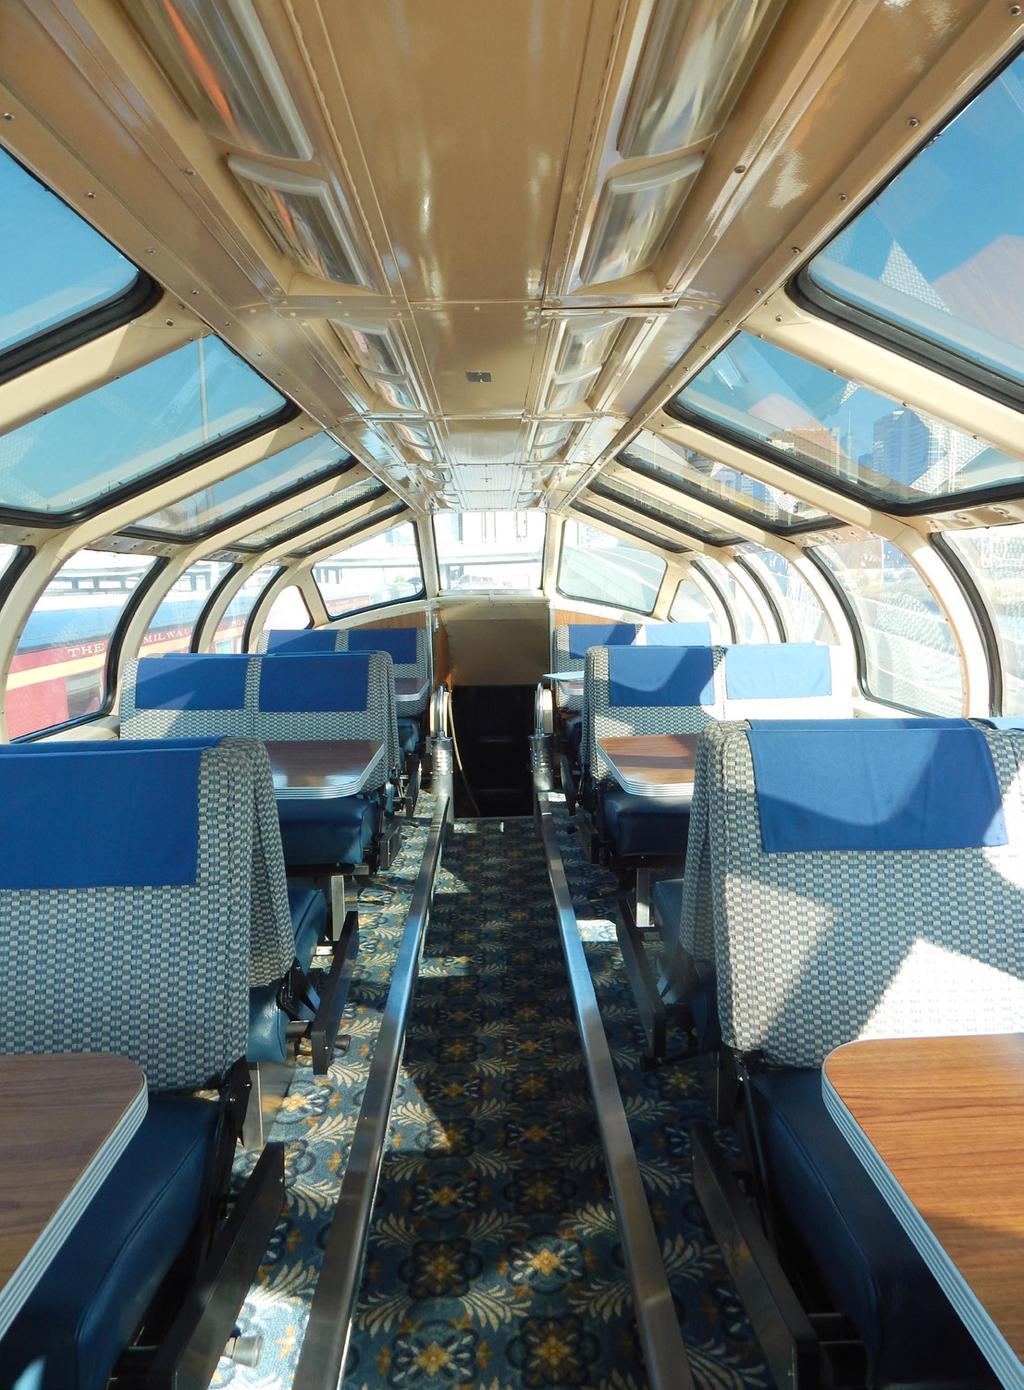 Our private cars include a dome car, the Moonlight Dome with 4 deluxe bedrooms, and the Birch Grove with